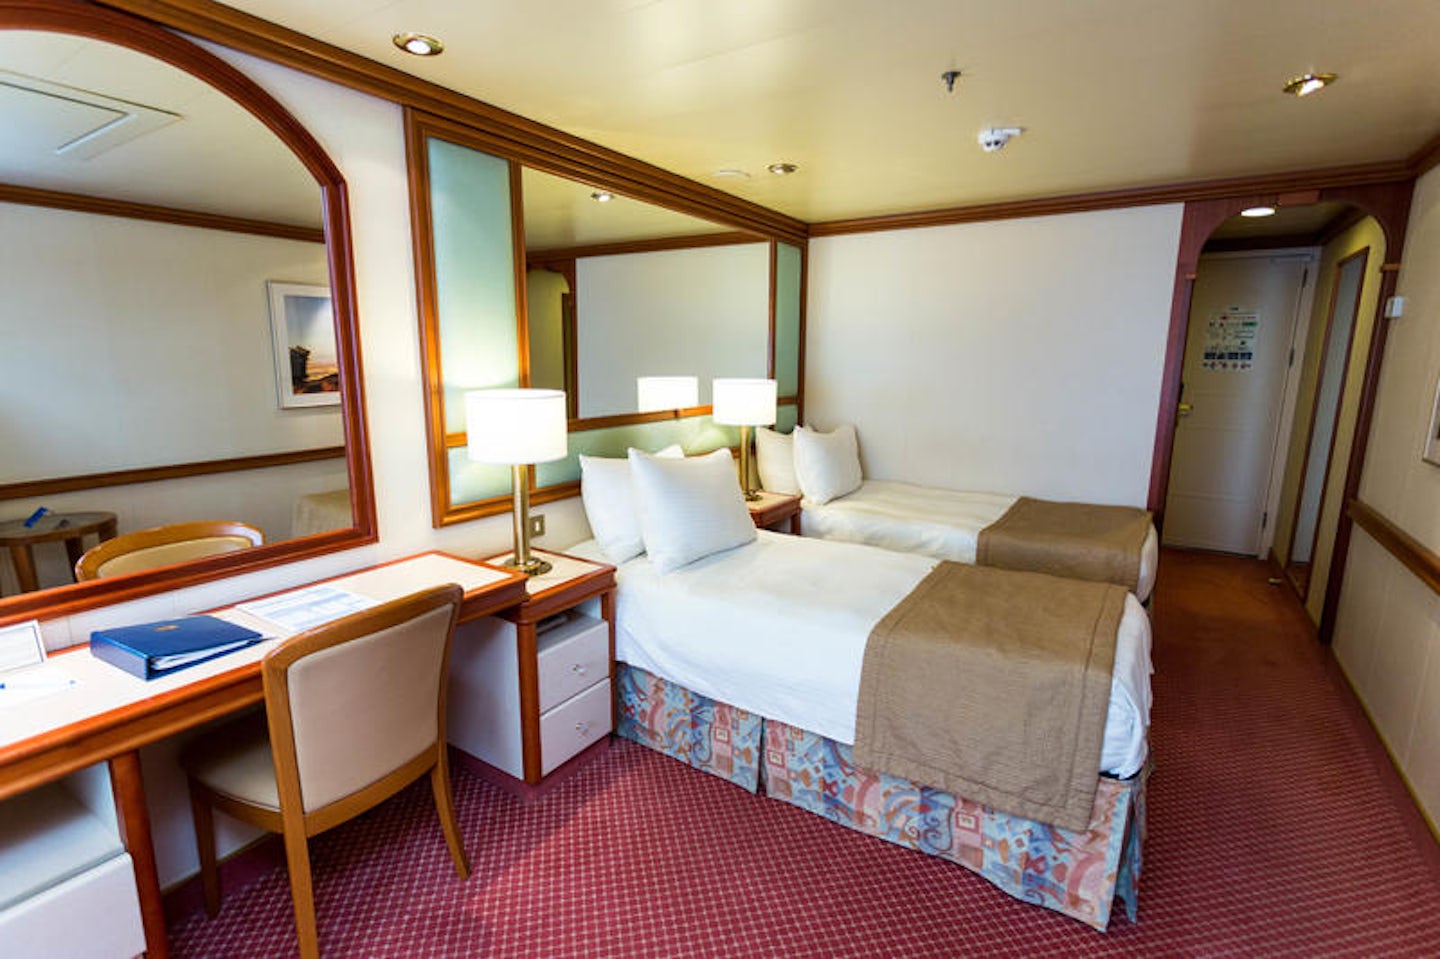 The Ocean-View Cabin on Island Princess